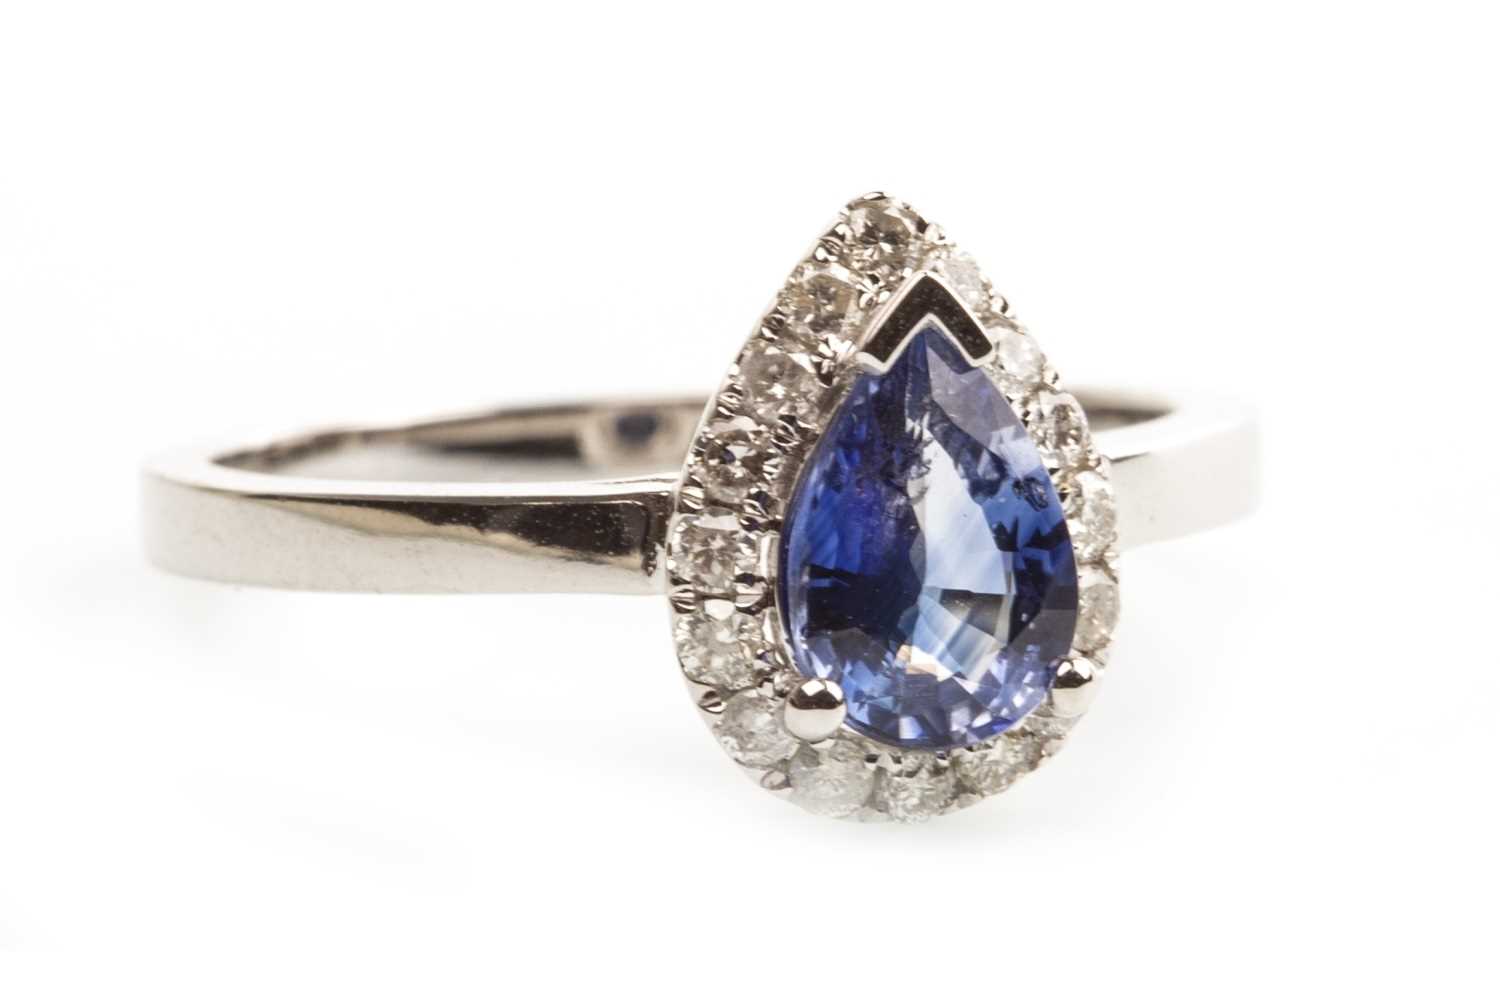 Lot 100 - A SAPPHIRE AND DIAMOND RING